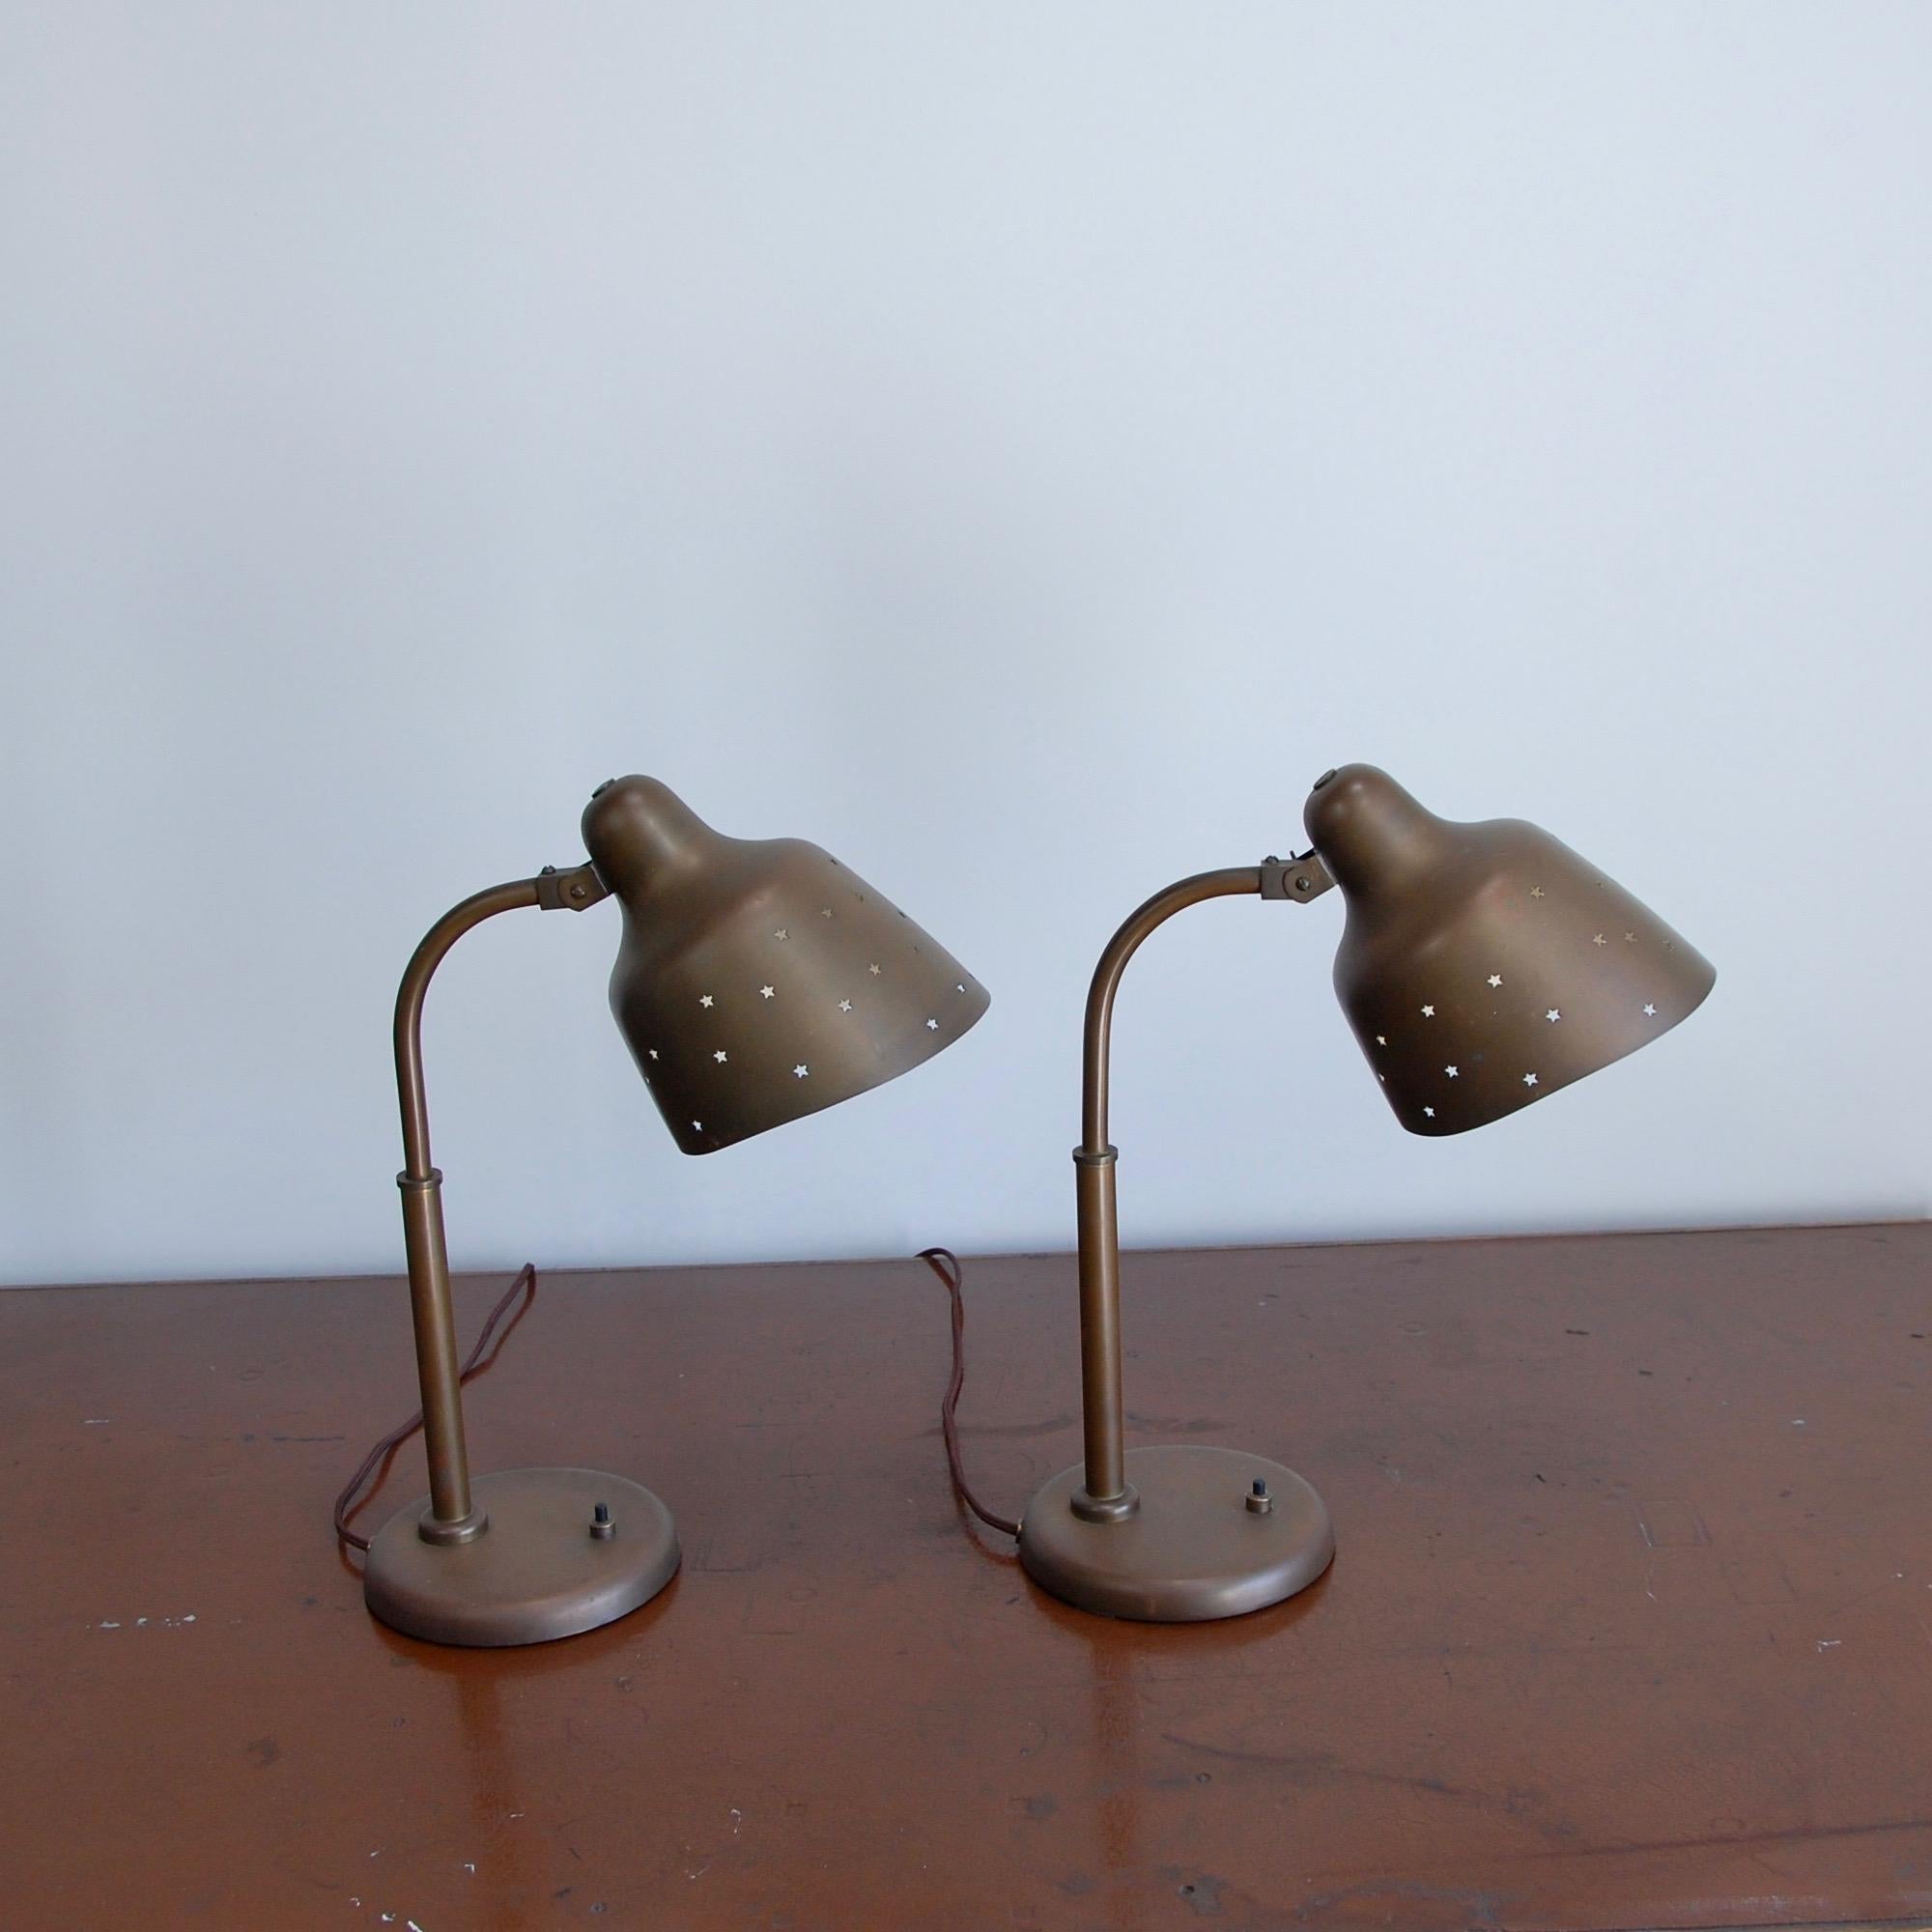 Pair of timeless brass Italian table lamps attributed to Arredoluce from the 1950s. Detailed with star perforations in the shades. Rewired with single E26 medium based socket per table lamp. Currently wired for use in the US. Priced as a